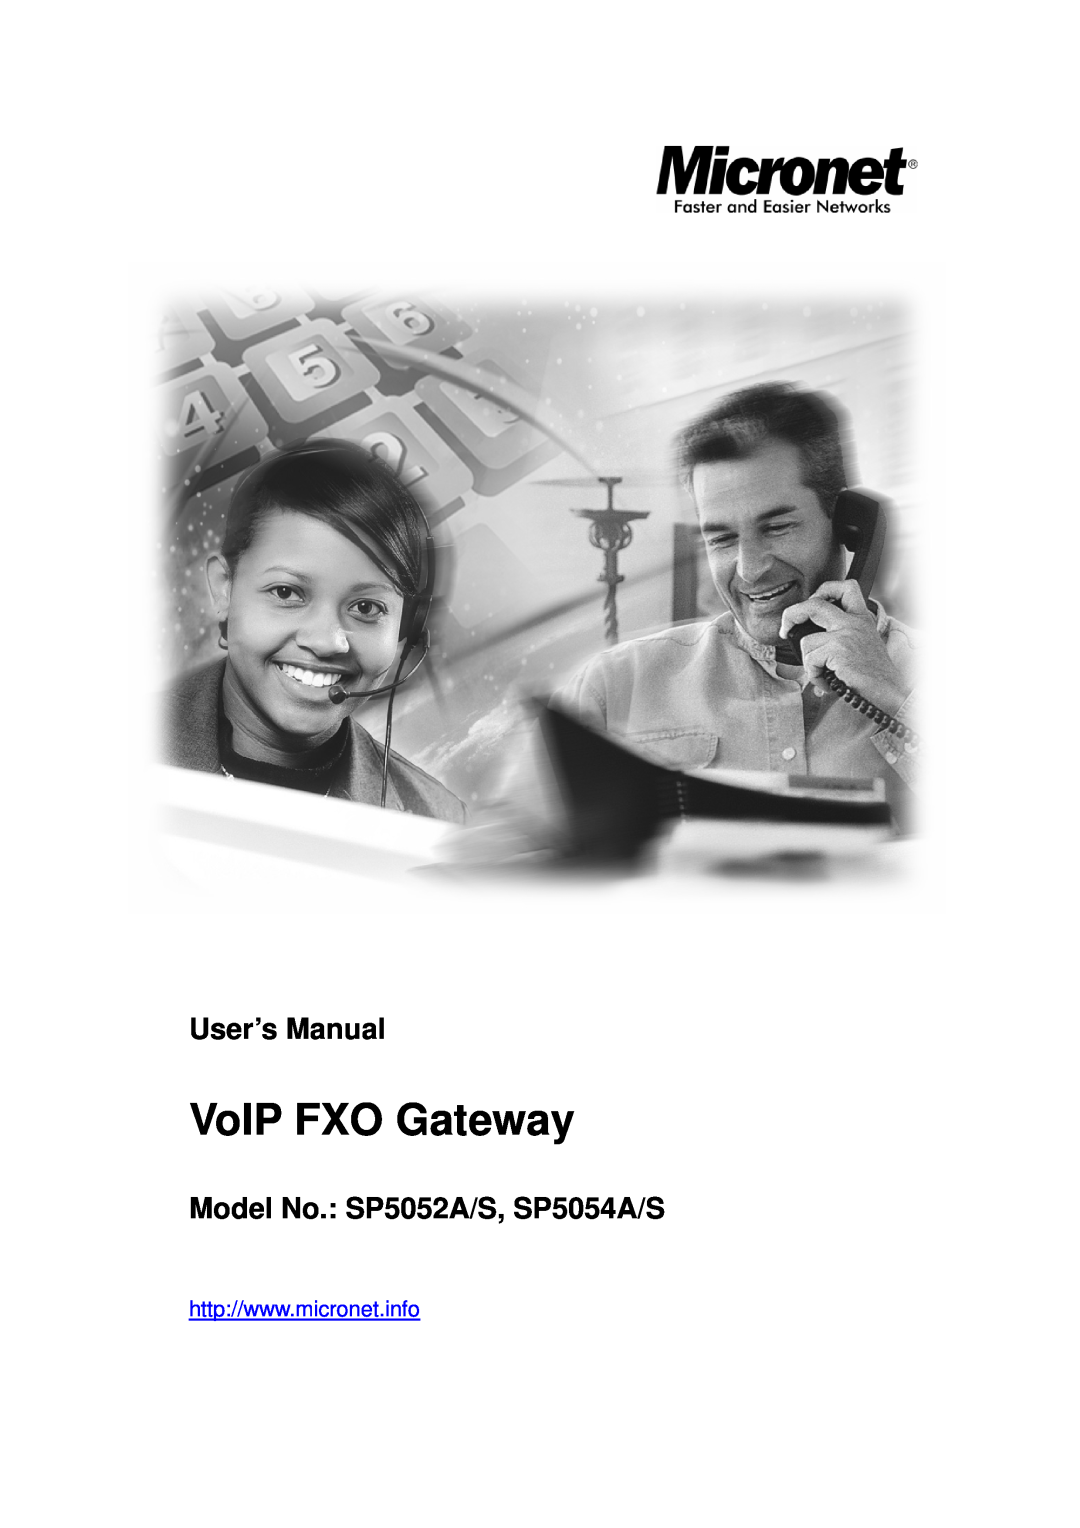 MicroNet Technology user manual User’s Manual, Model No. SP5052A/S, SP5054A/S, VoIP FXO Gateway 